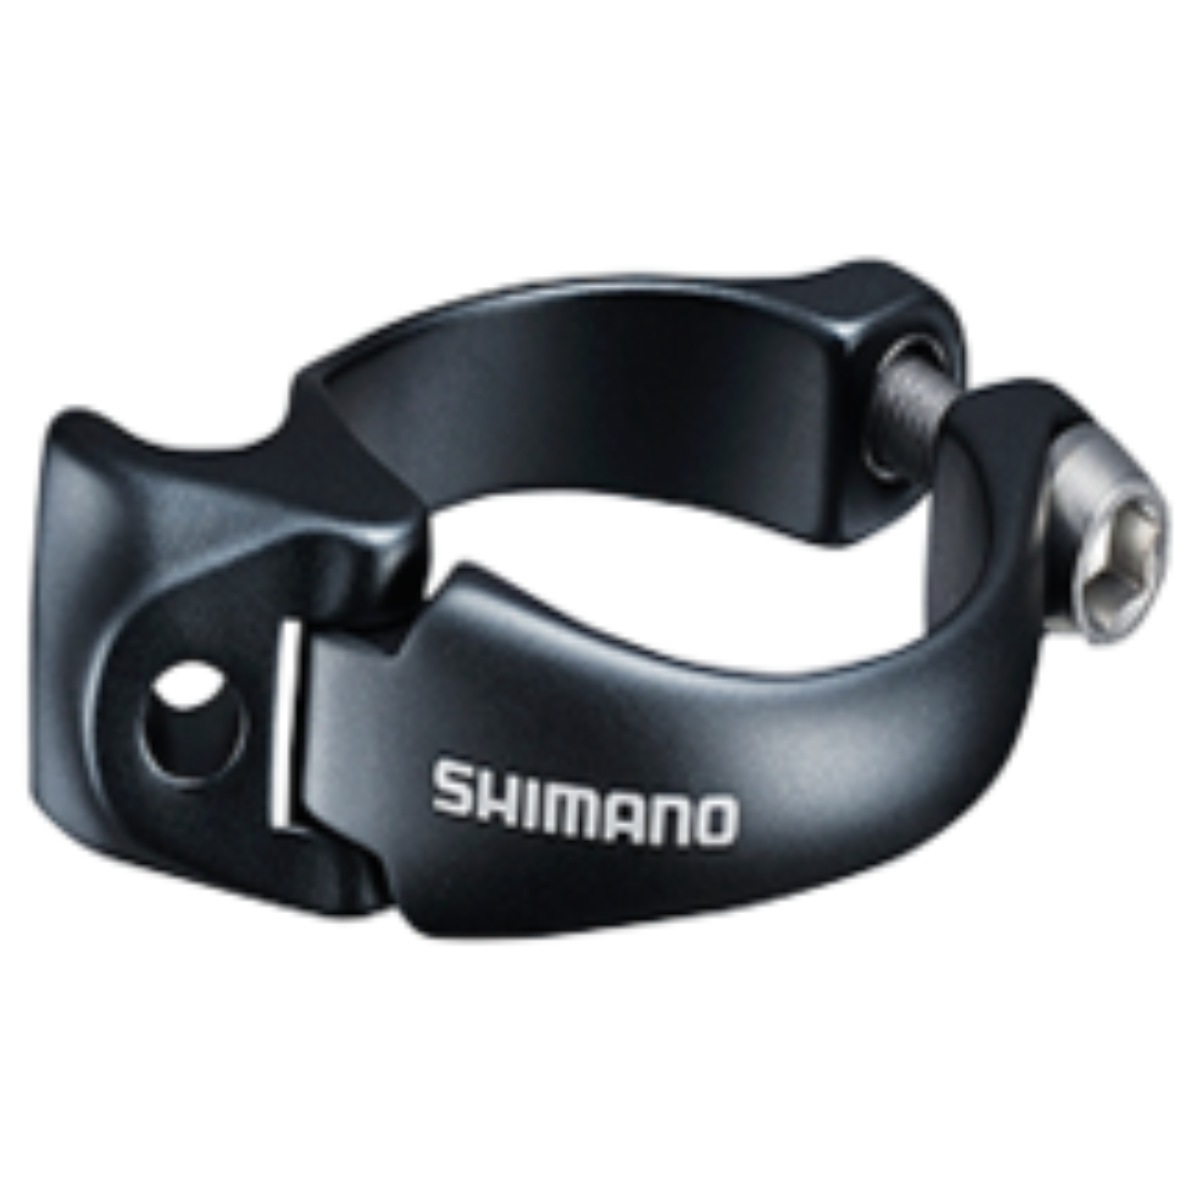 Shimano Front Derailleur Clamp Band Adapter - 28.6mm